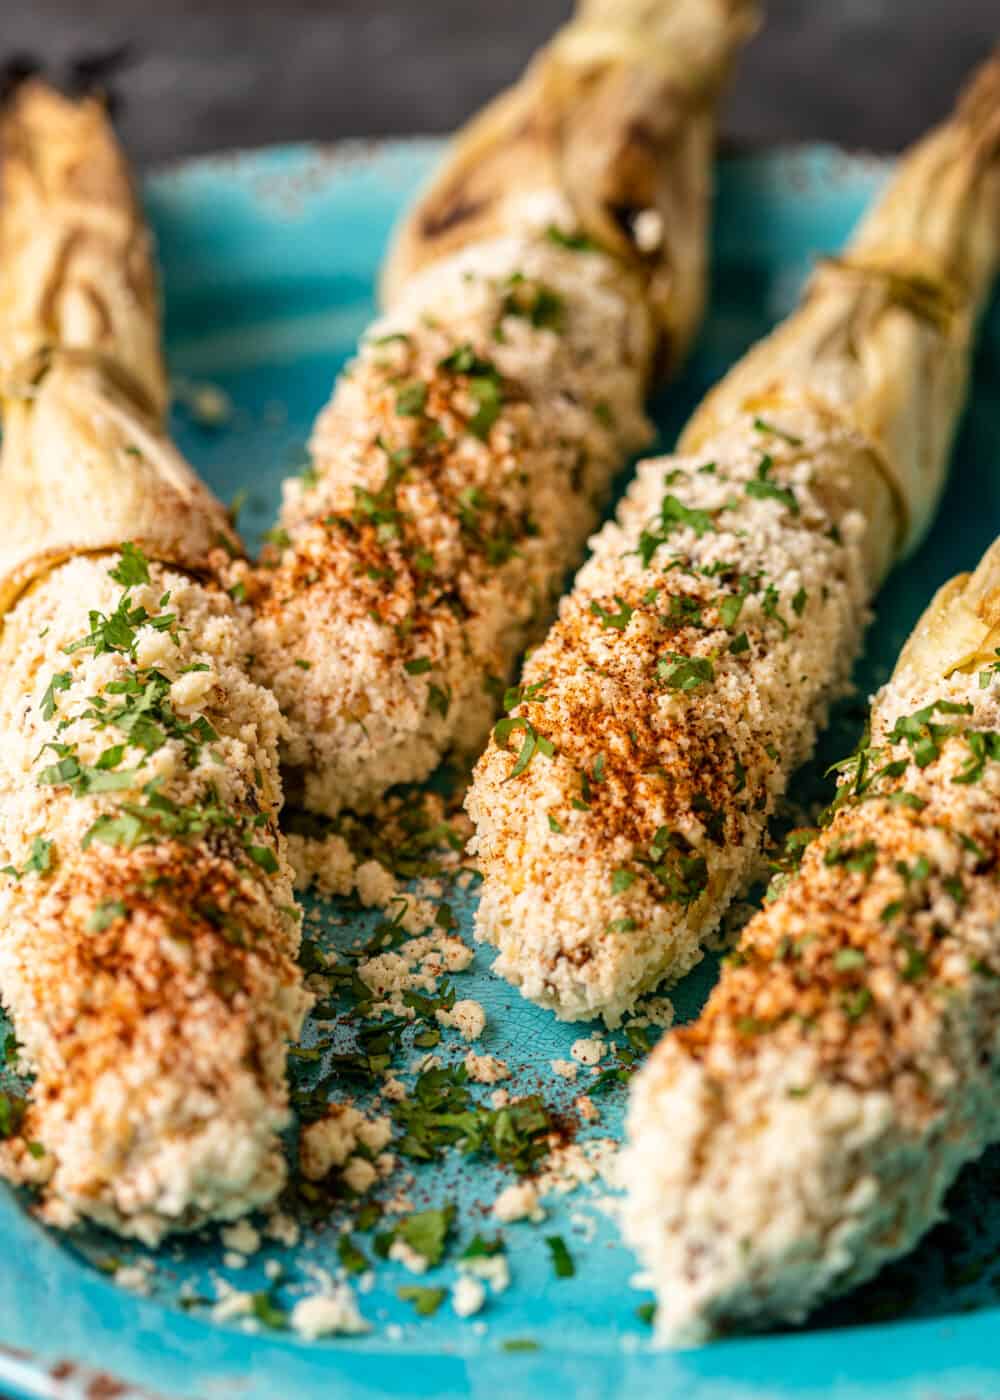 4 ears of Mexican elote